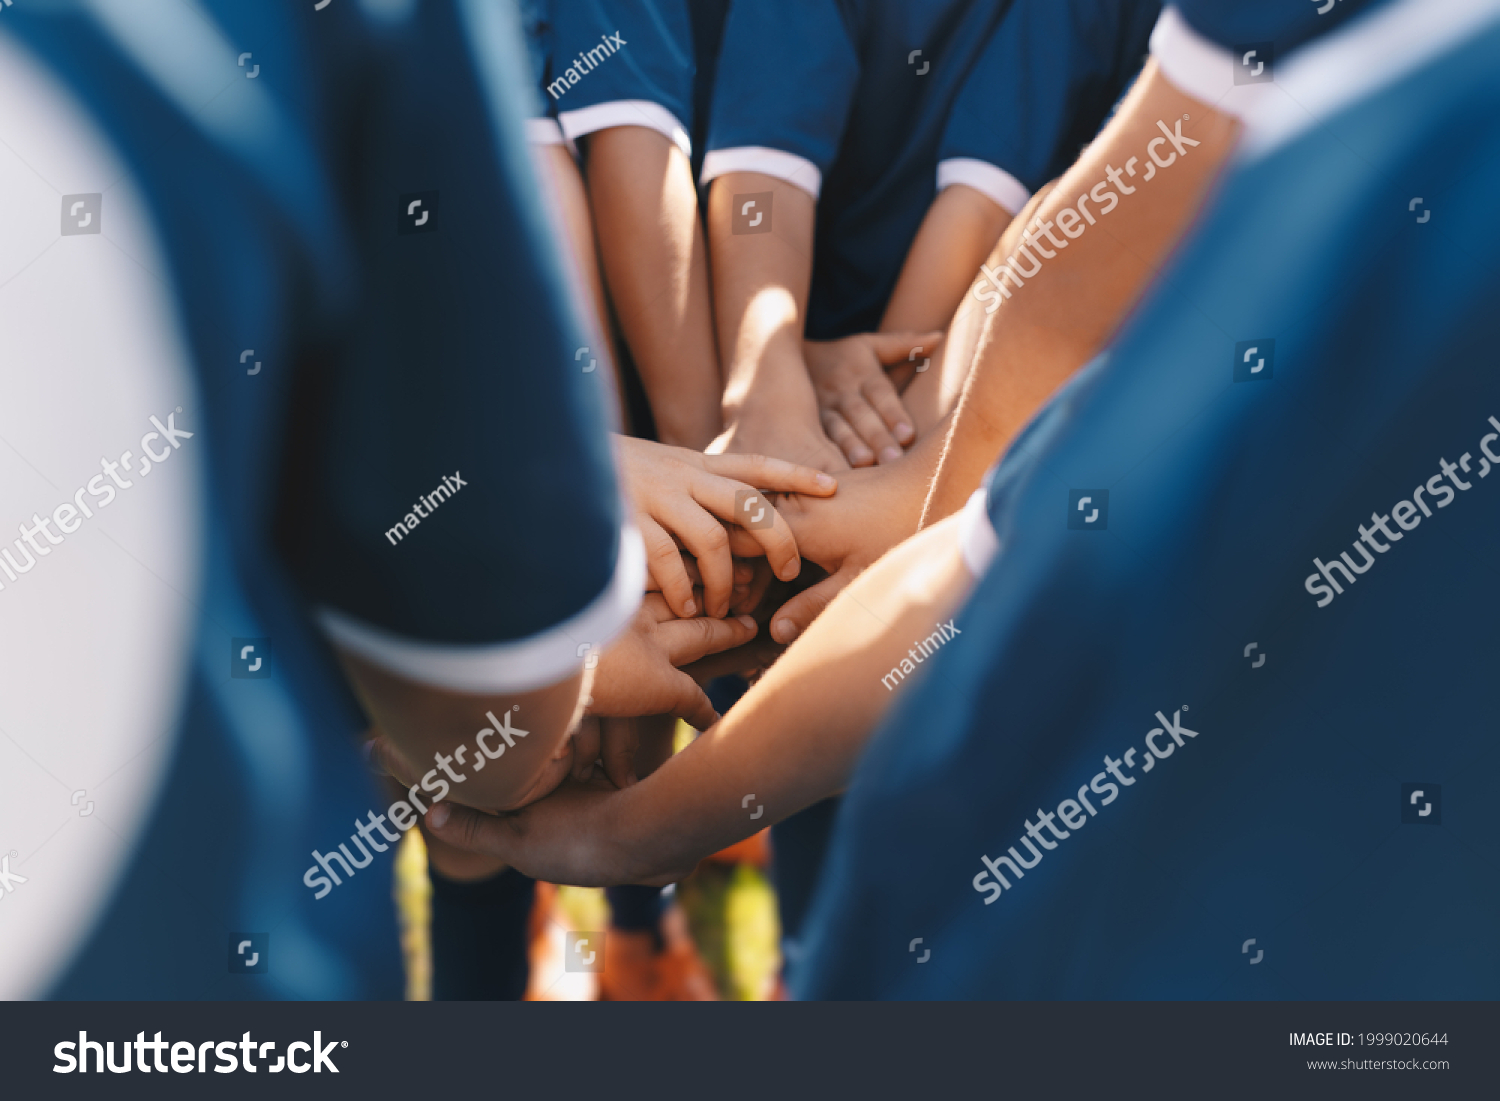 Sports team stacking hands together in a group. Happy children teammates motivated in a team. Team building activities and boosting sports players' morale. Schoolboys building team spirit before game #1999020644